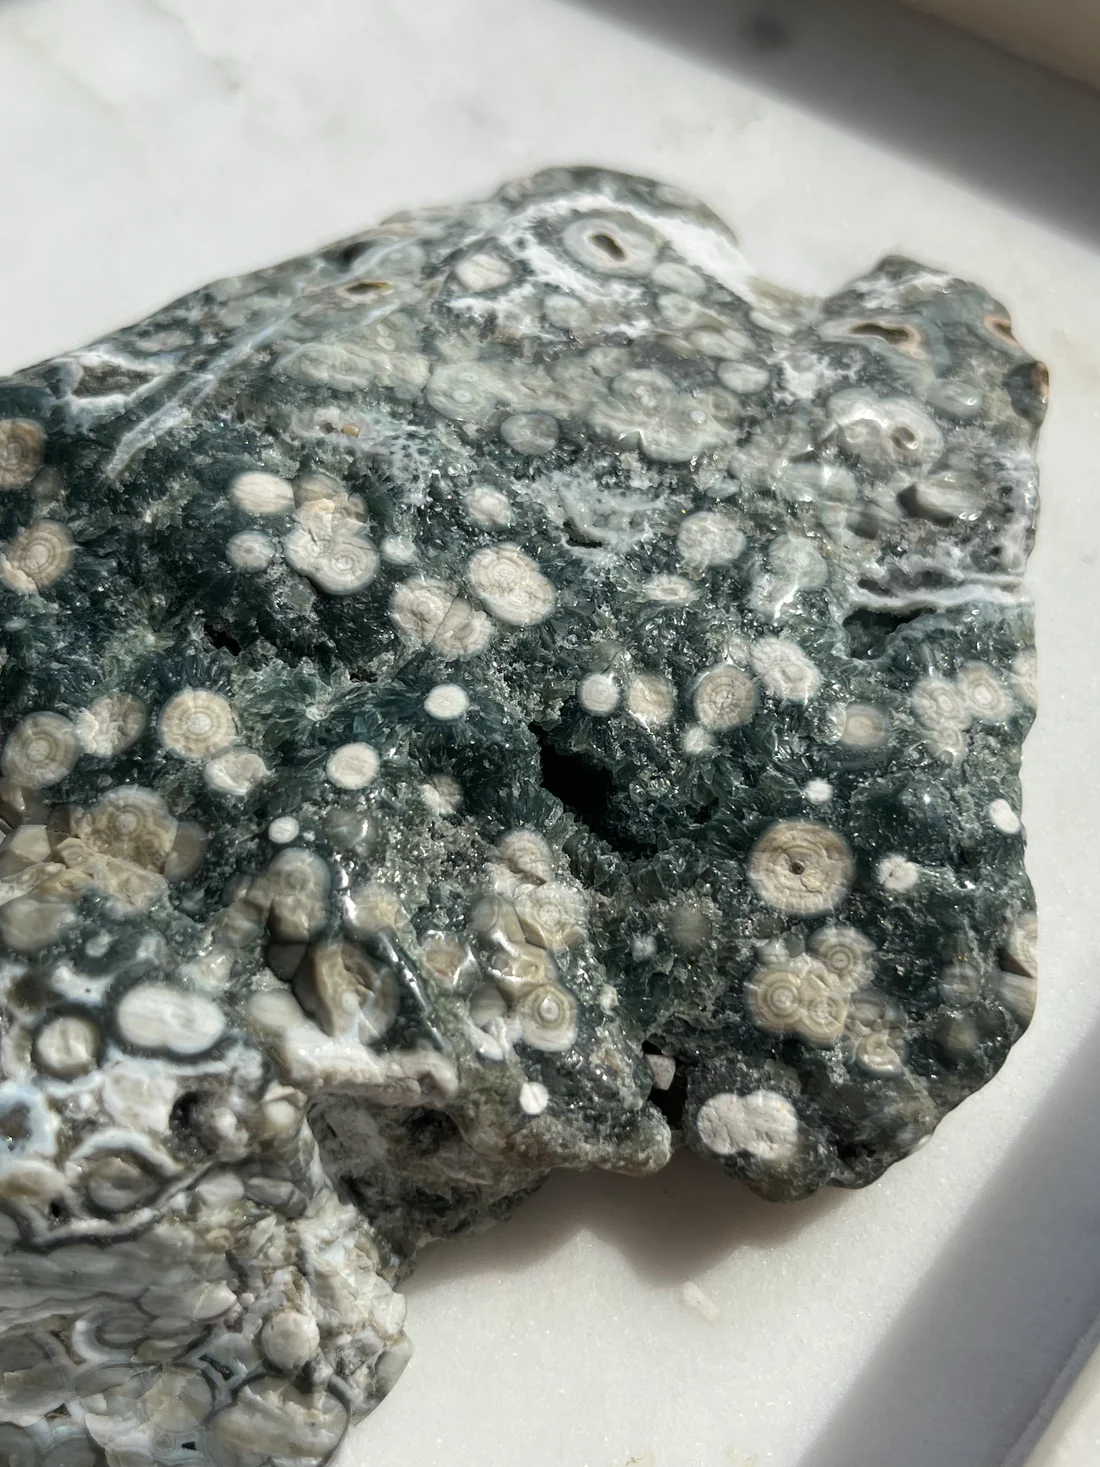 What's in a Vein? Exploring the 6th, 7th & 8th Veins of Ocean Jasper